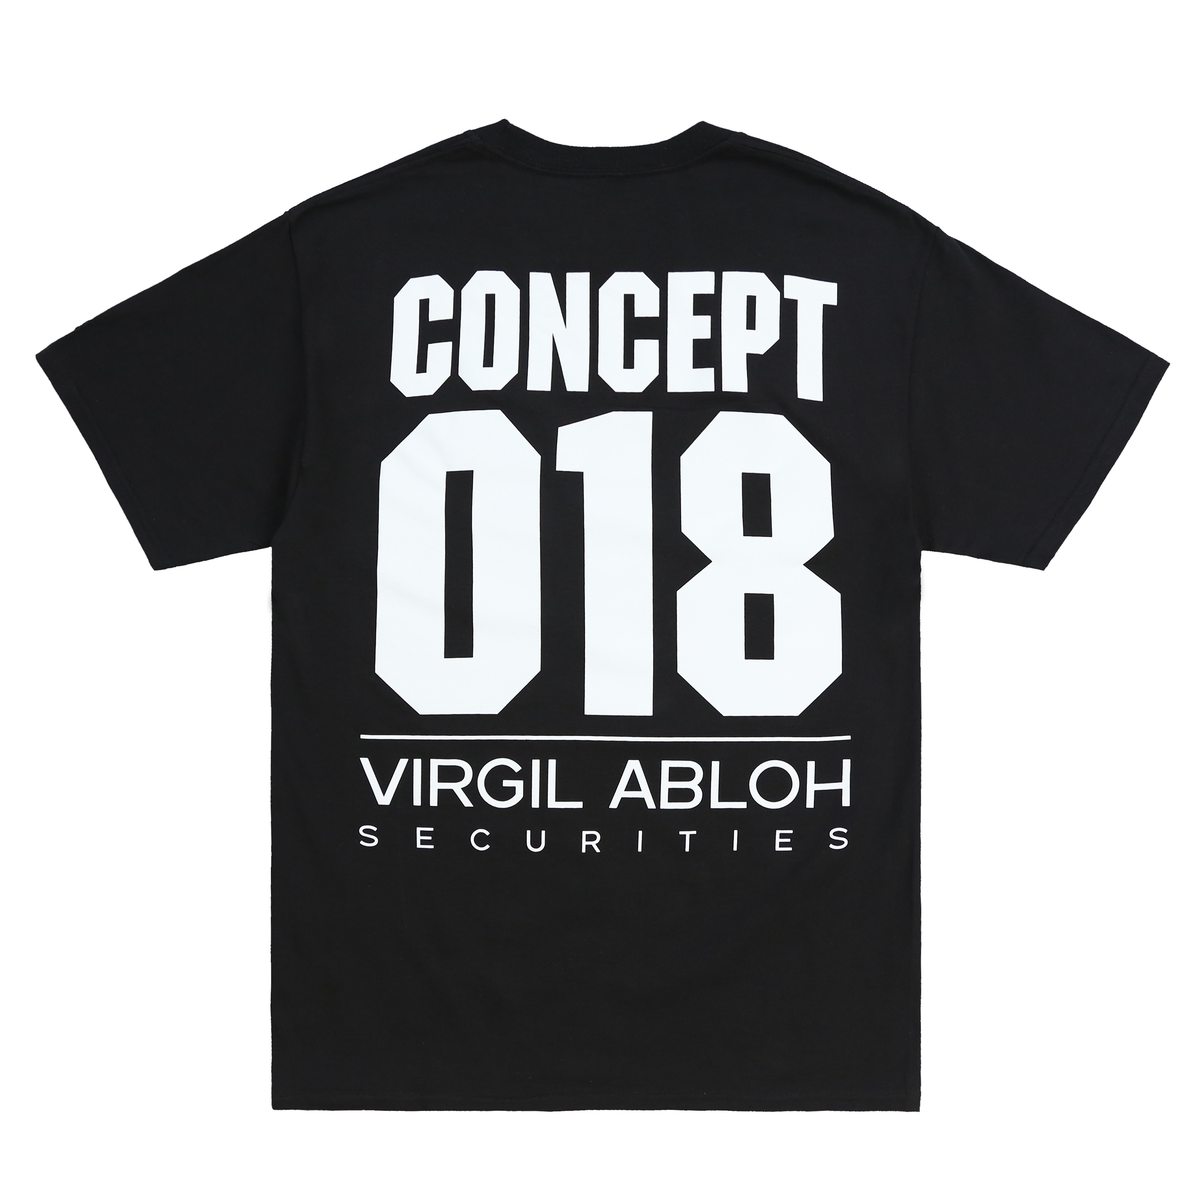 Virgil Abloh Securities Concept T-Shirt – Canary Yellow